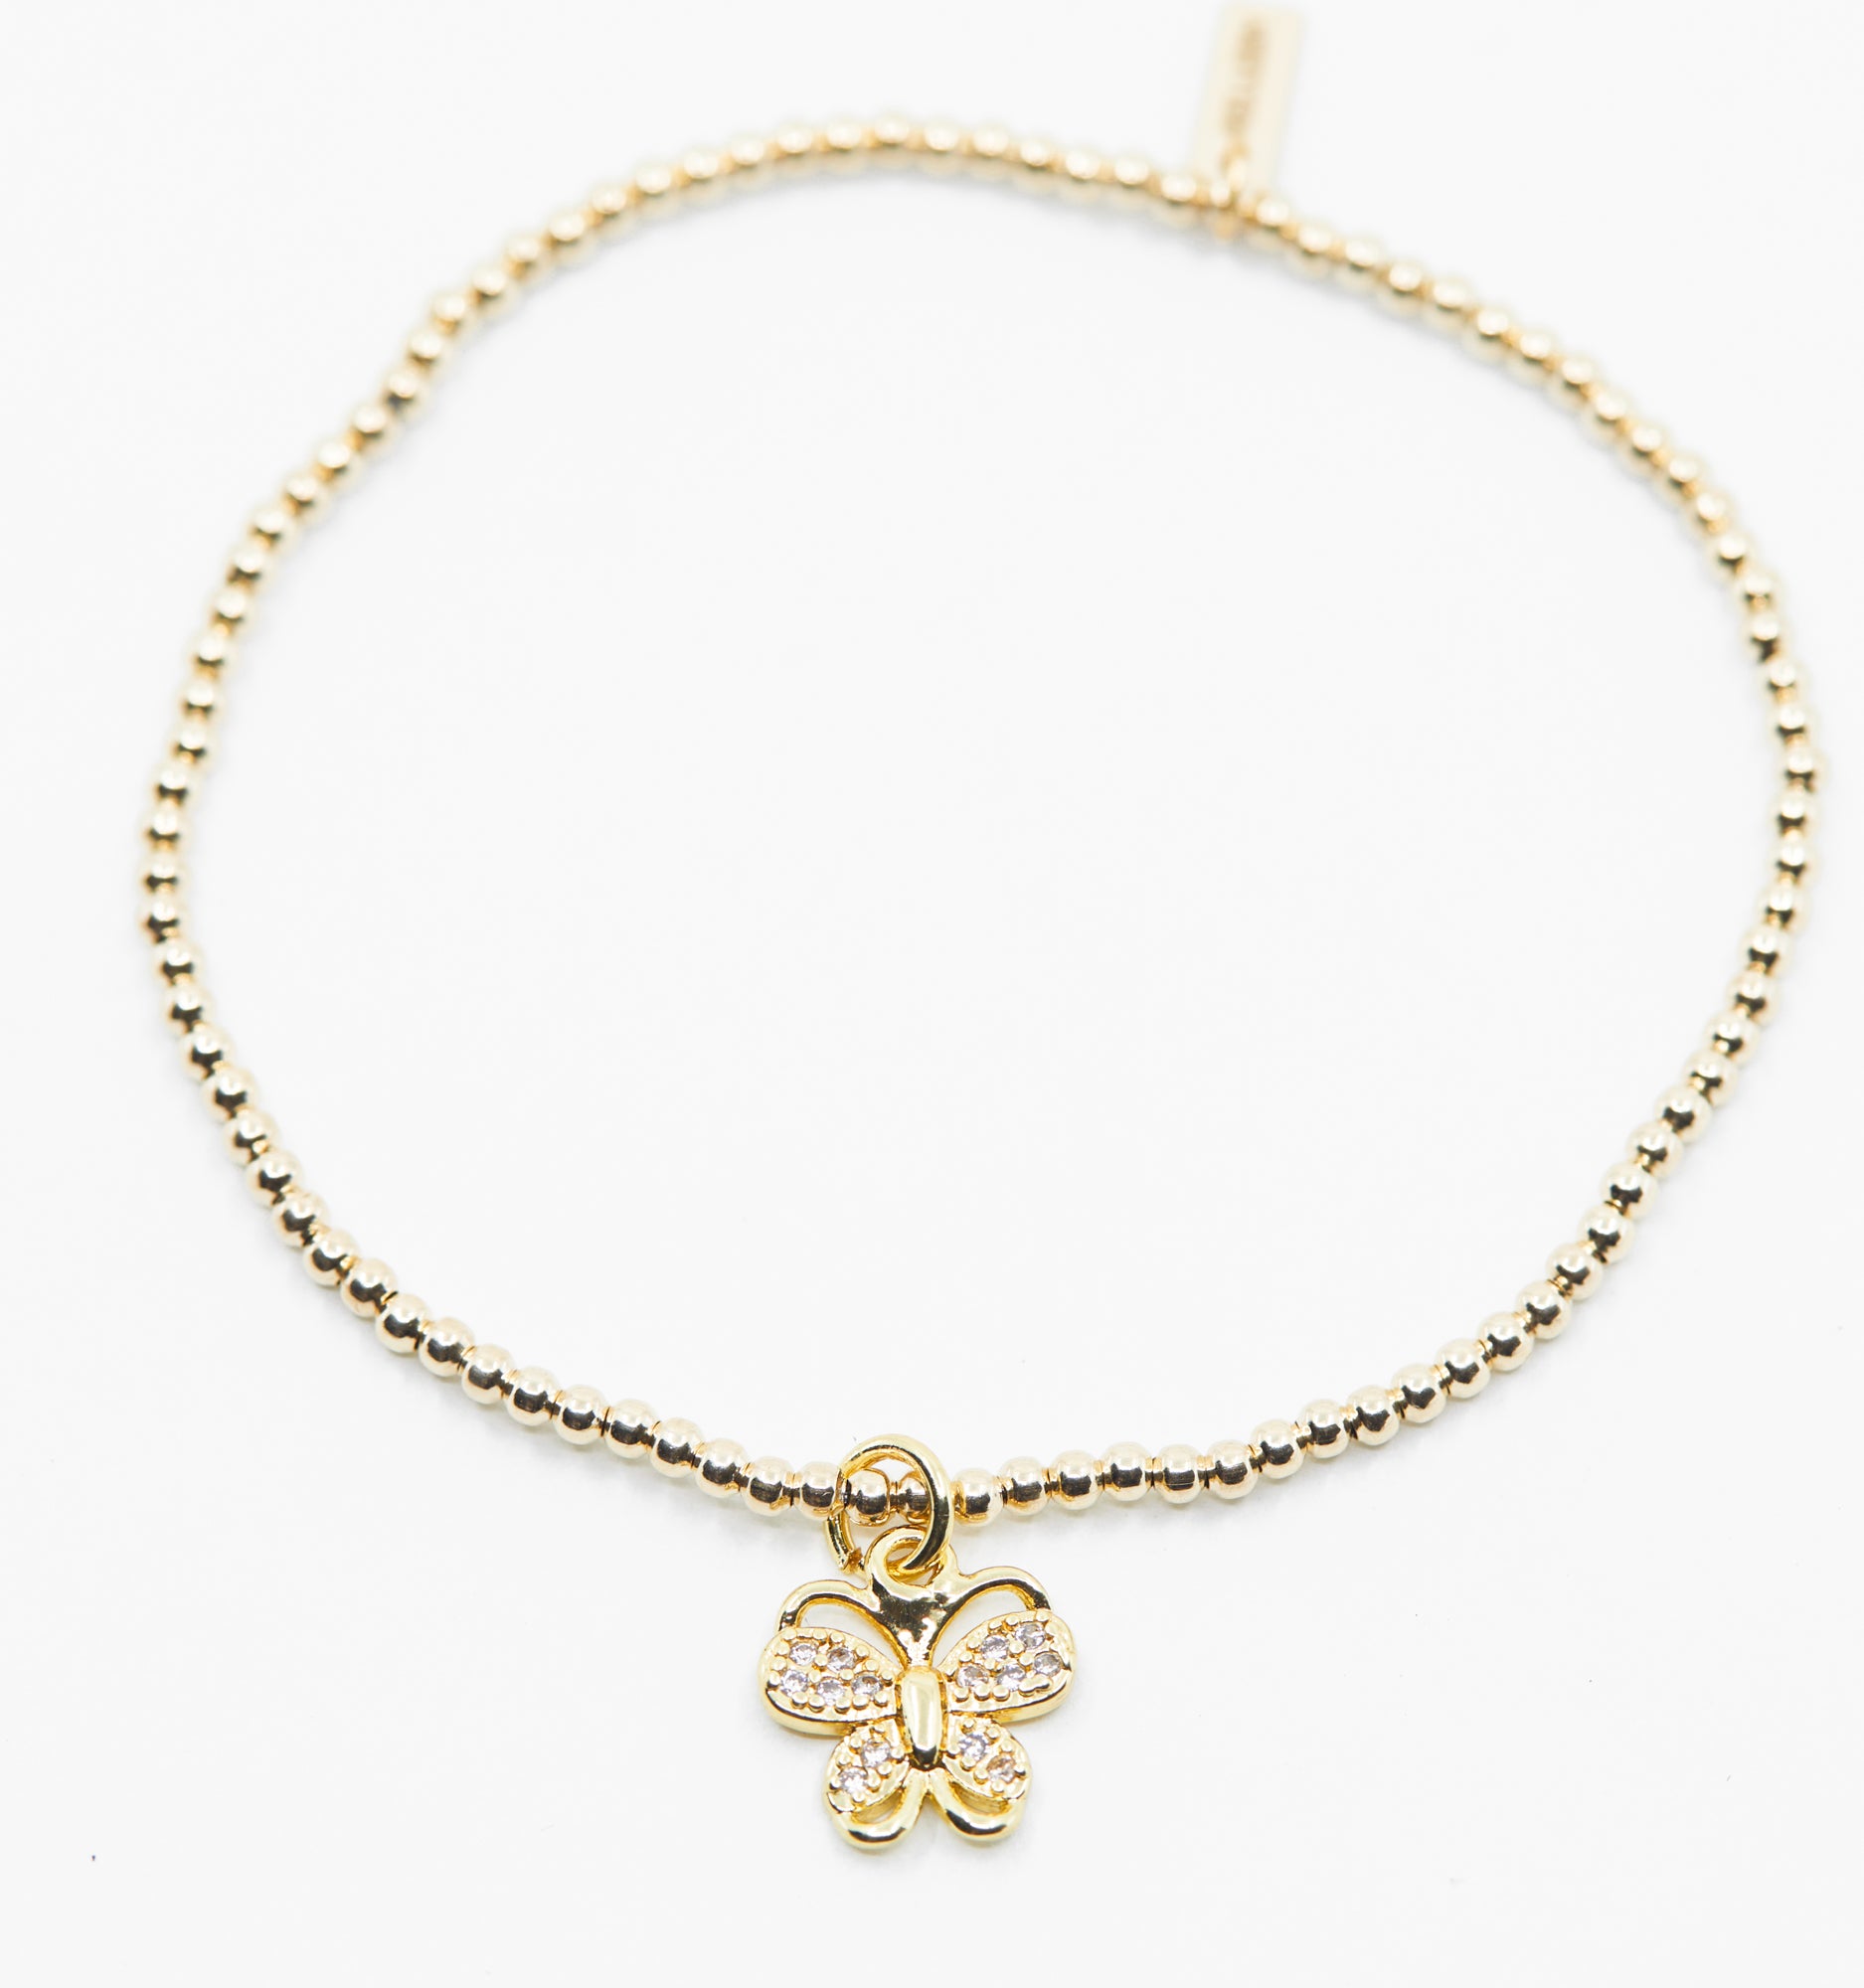 Butterfly Bracelet With Ball Chain